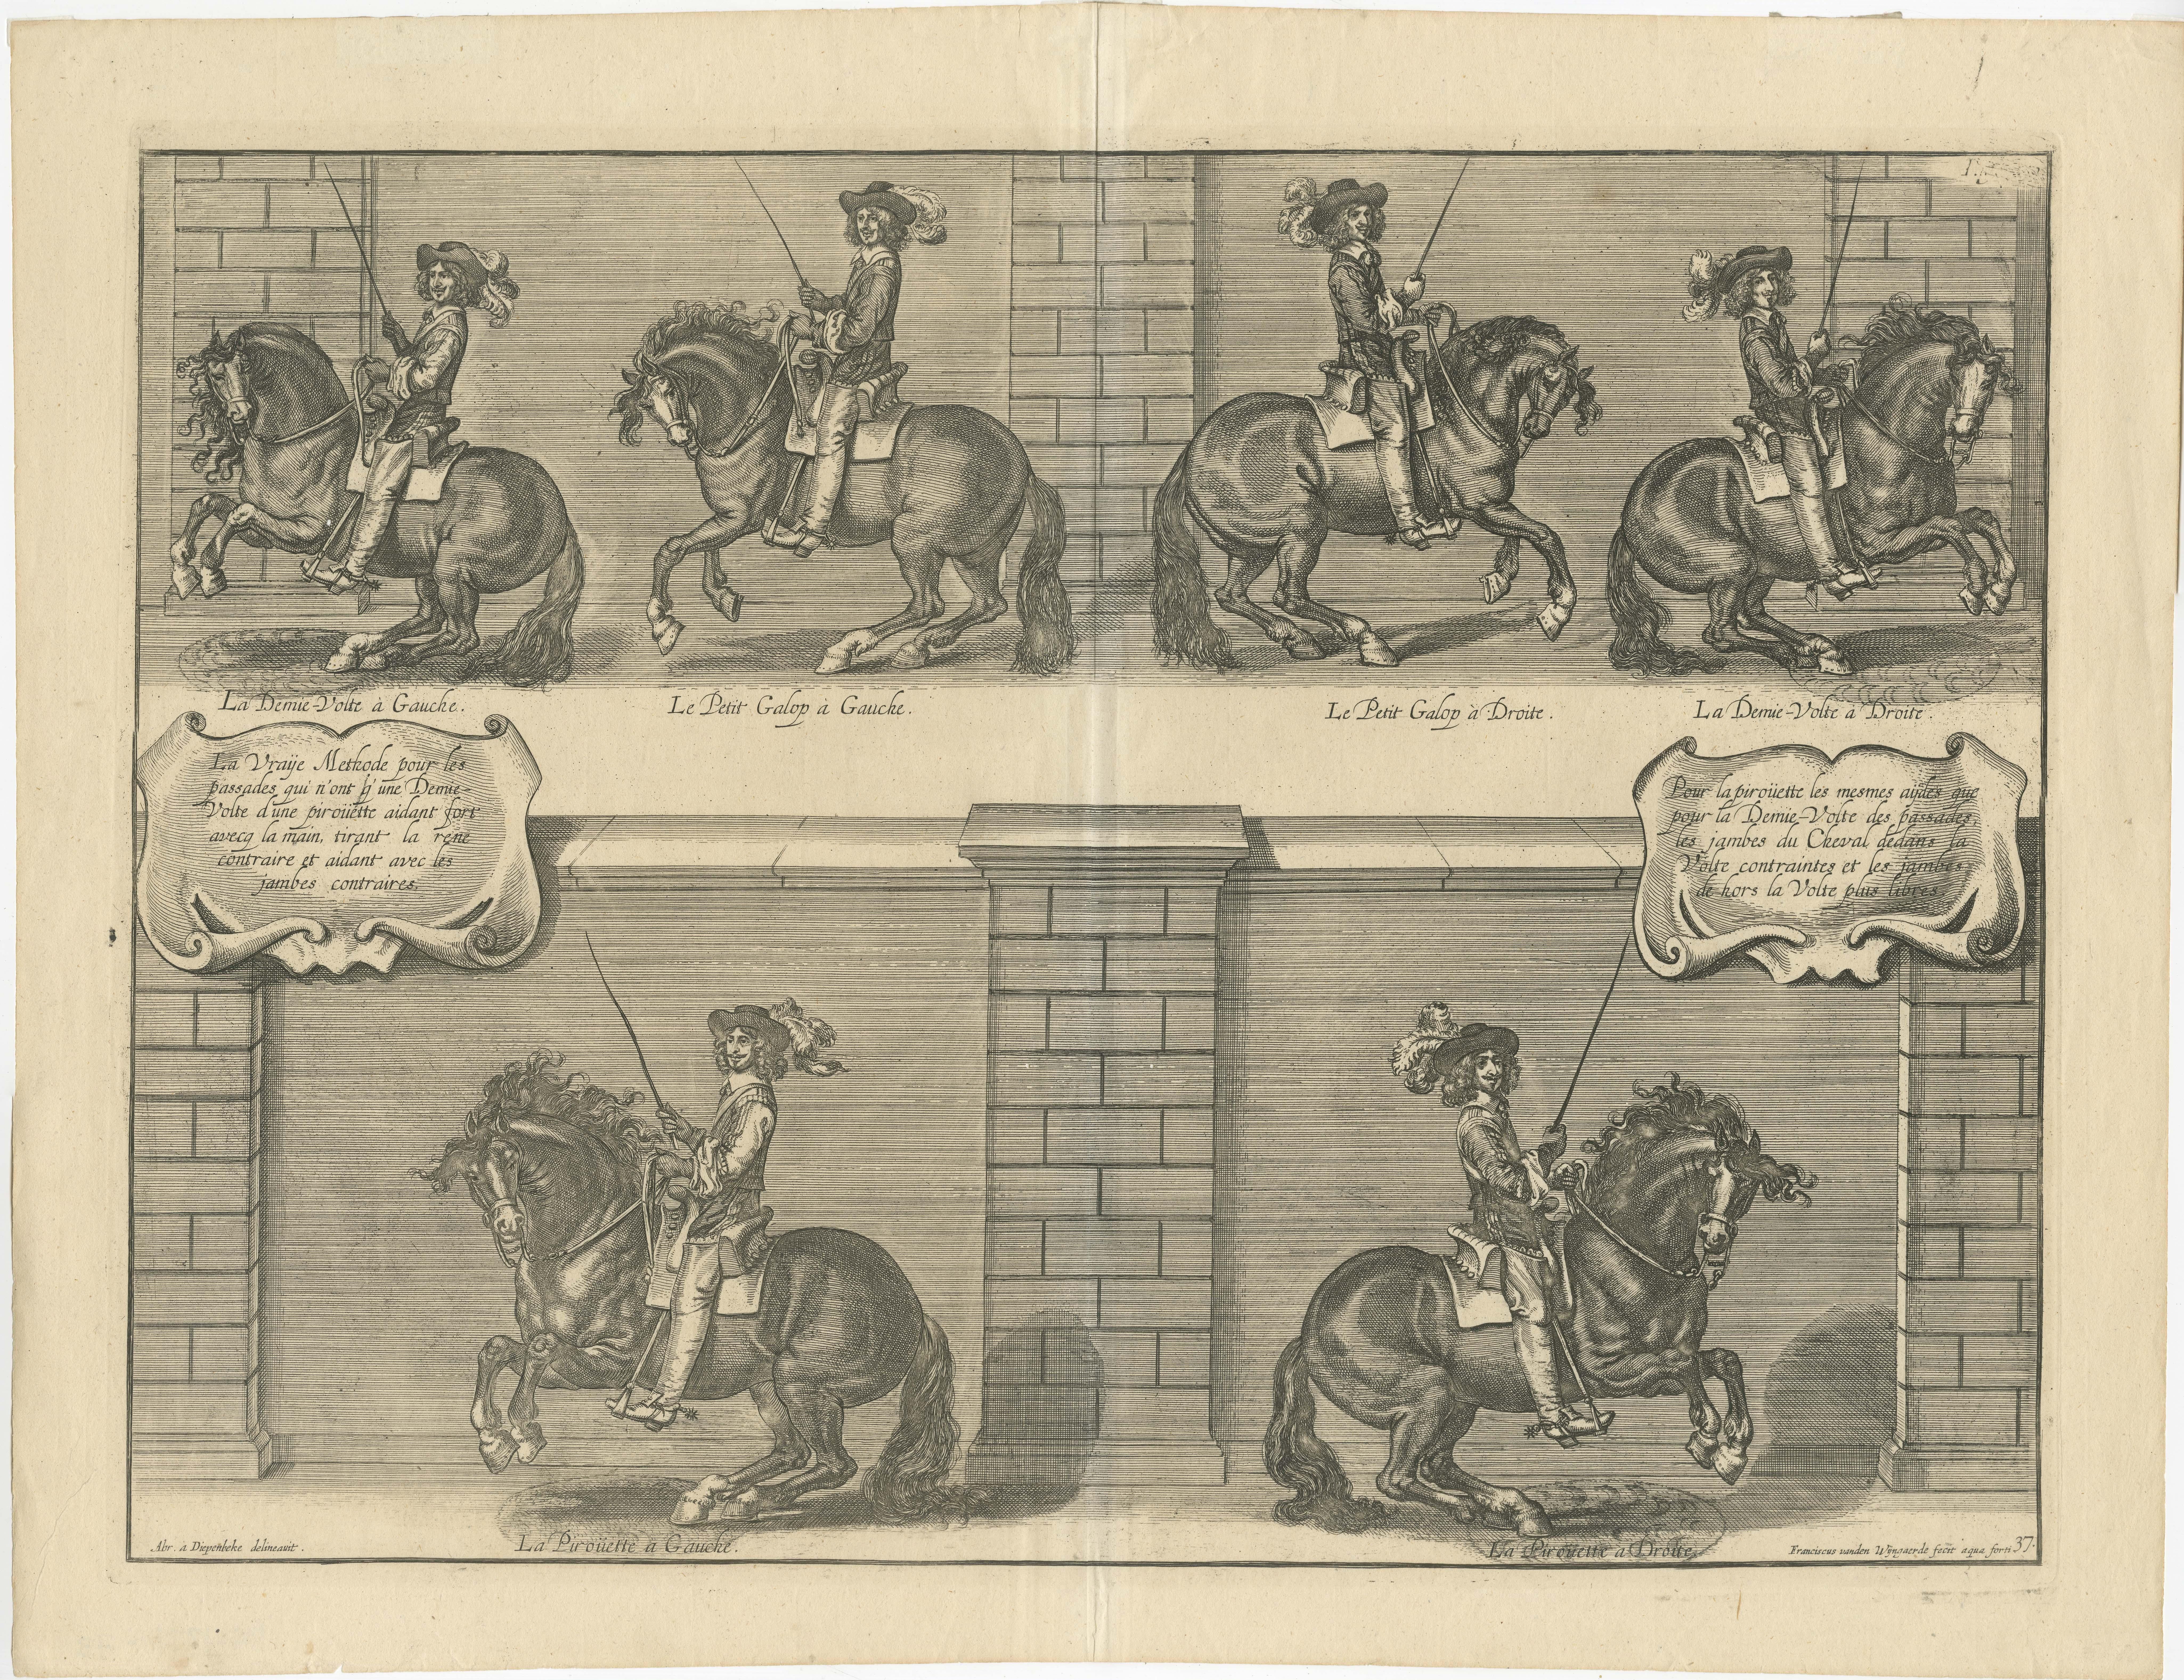 Antique print titled 'La Vraije Methode pour les passades'. Original old print of the Duke of Newcastle enacting half turns, canters and pirouettes on horseback. This print originates from the 1737 English edition of Cavendish's exposition on the